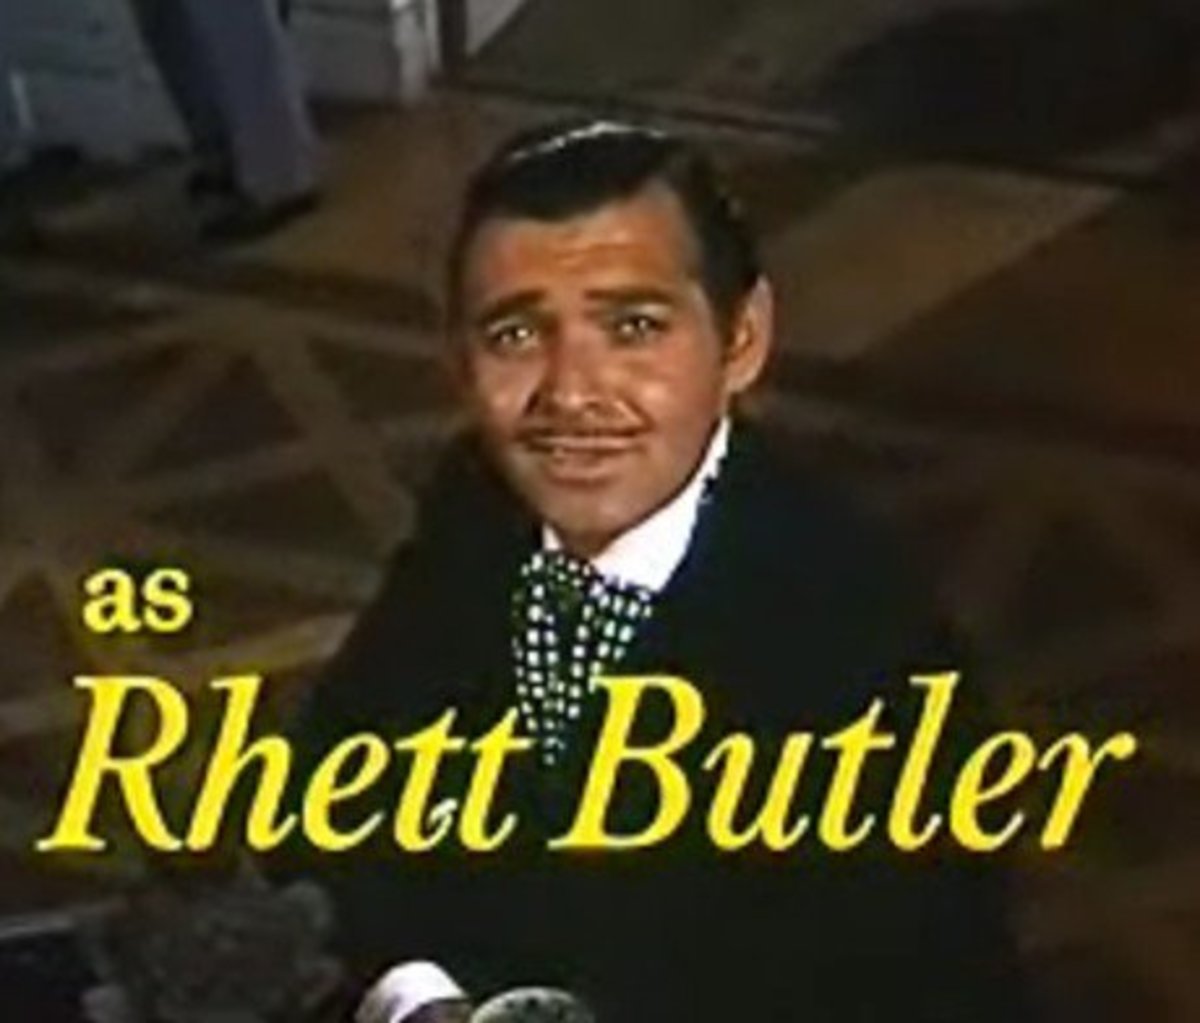 Cropped screenshot of Clark Gable from the trailer for the film Gone with the Wind.